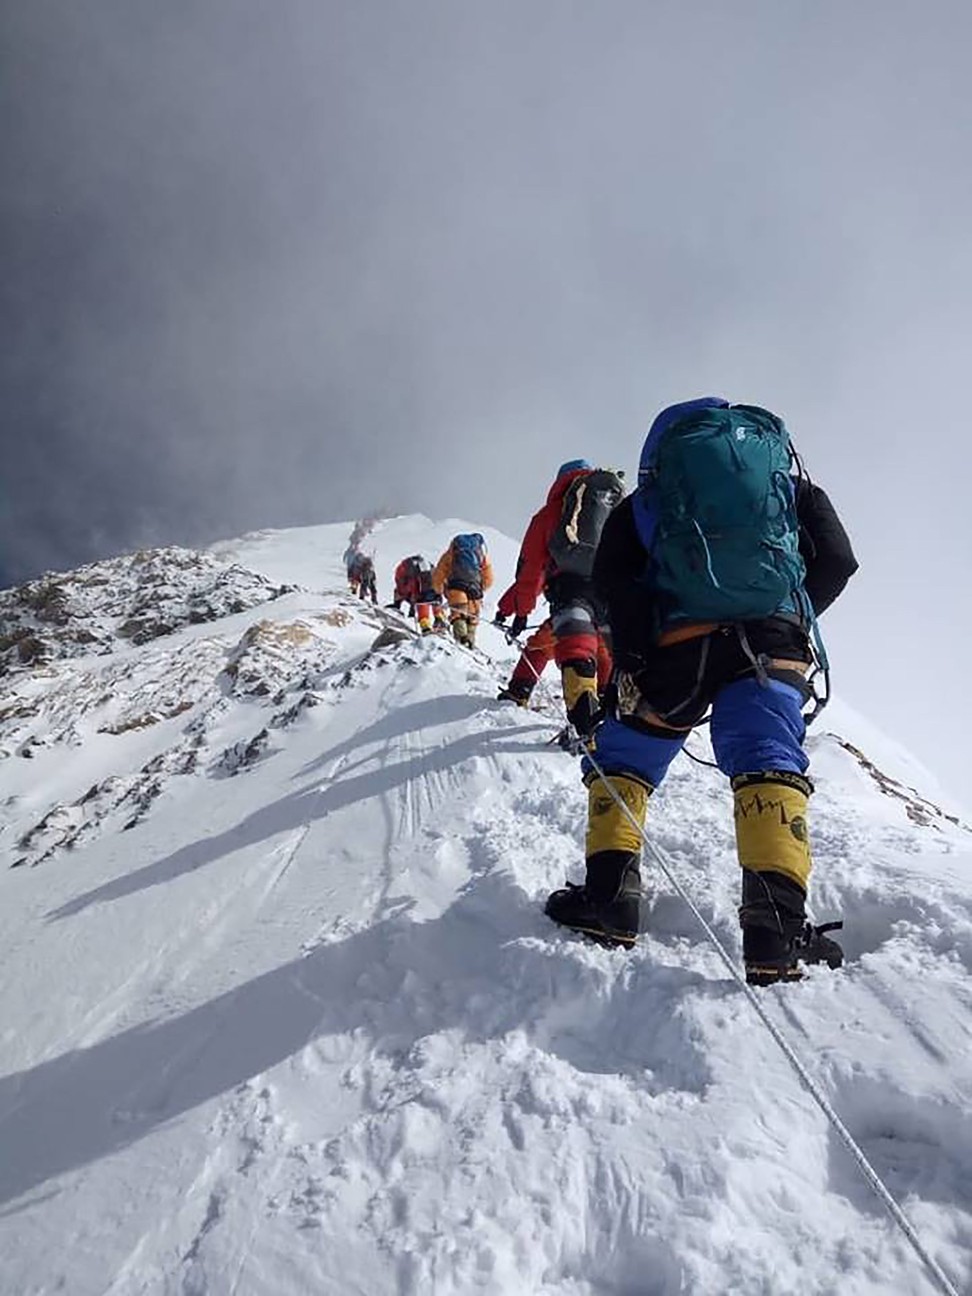 Climbers join the line en route to the summit. Photo: AFP